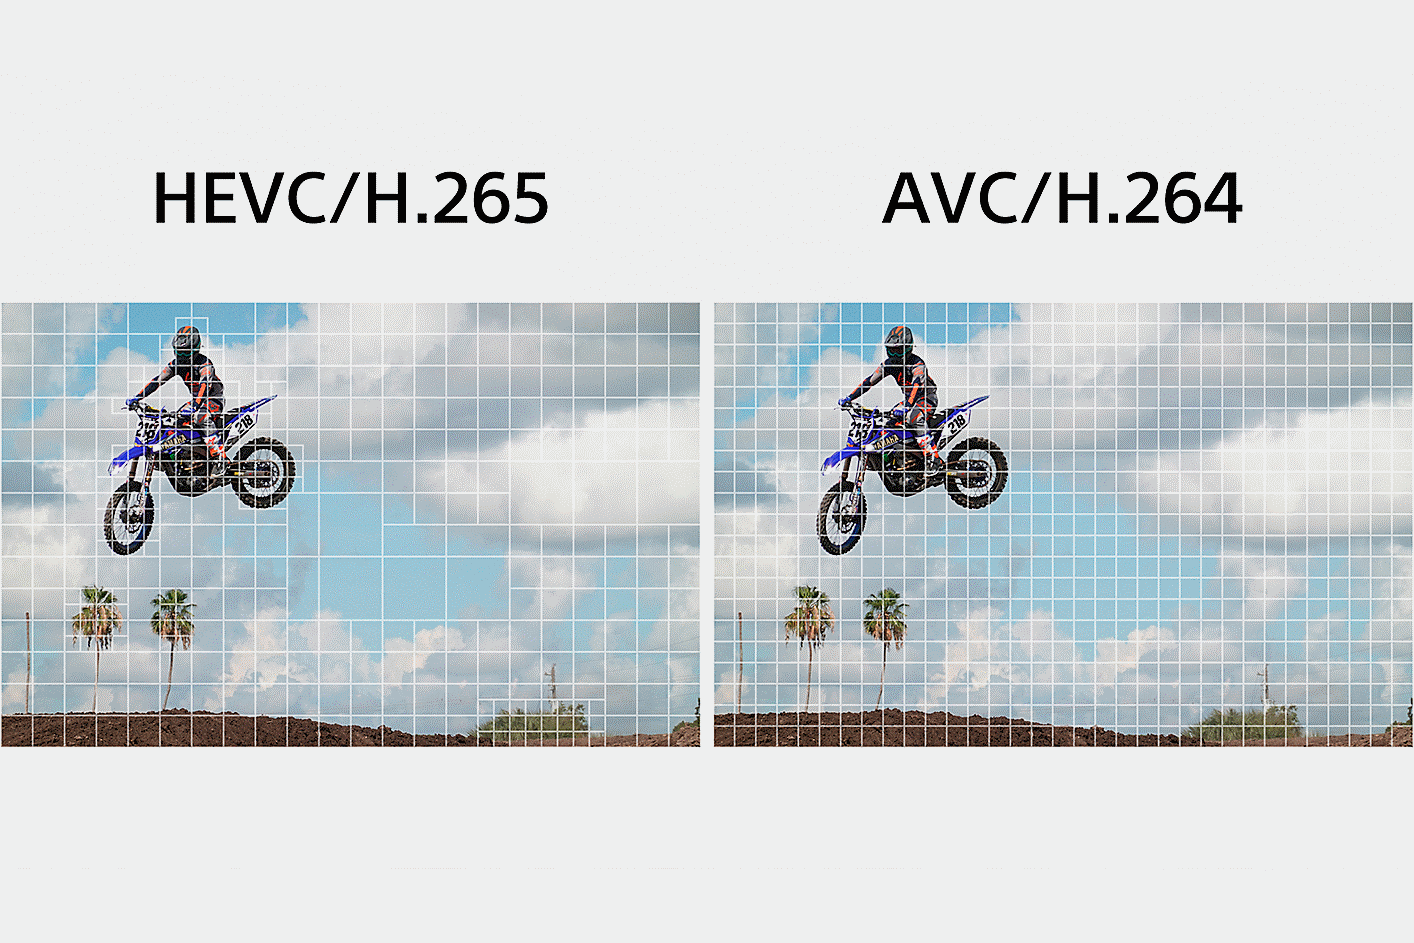 Left: an Illustration of HEVC/H.265, dividing complex part of the clip into finer segments to process data; Right: an Illustration of AVC/H.264, equally dividing the entire video imagery to process data